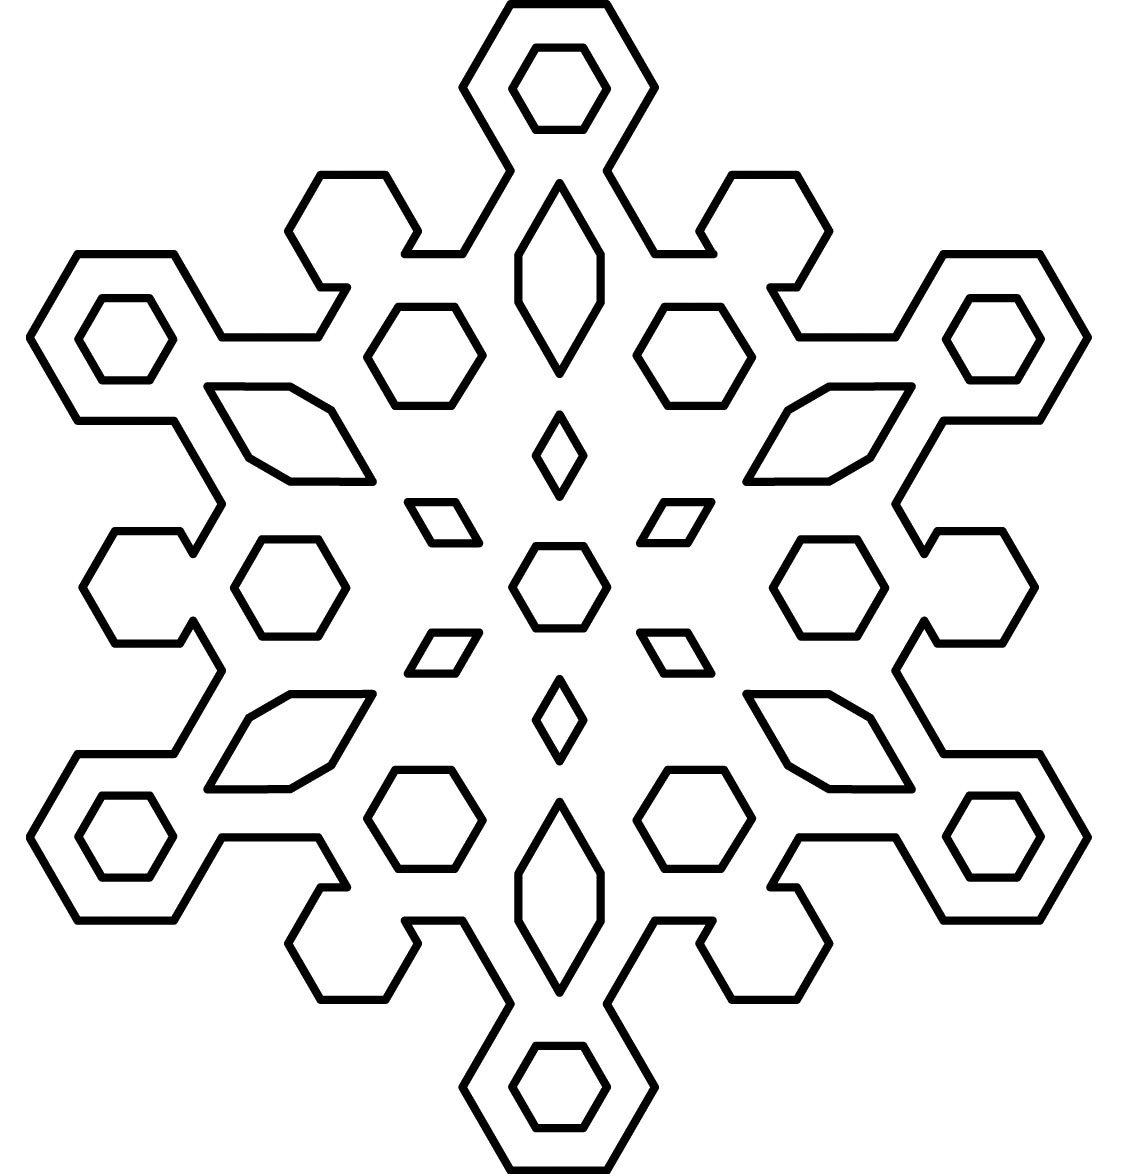 Snowflake Coloring Pages Printable
 Free Printable Snowflake Coloring Pages For Kids